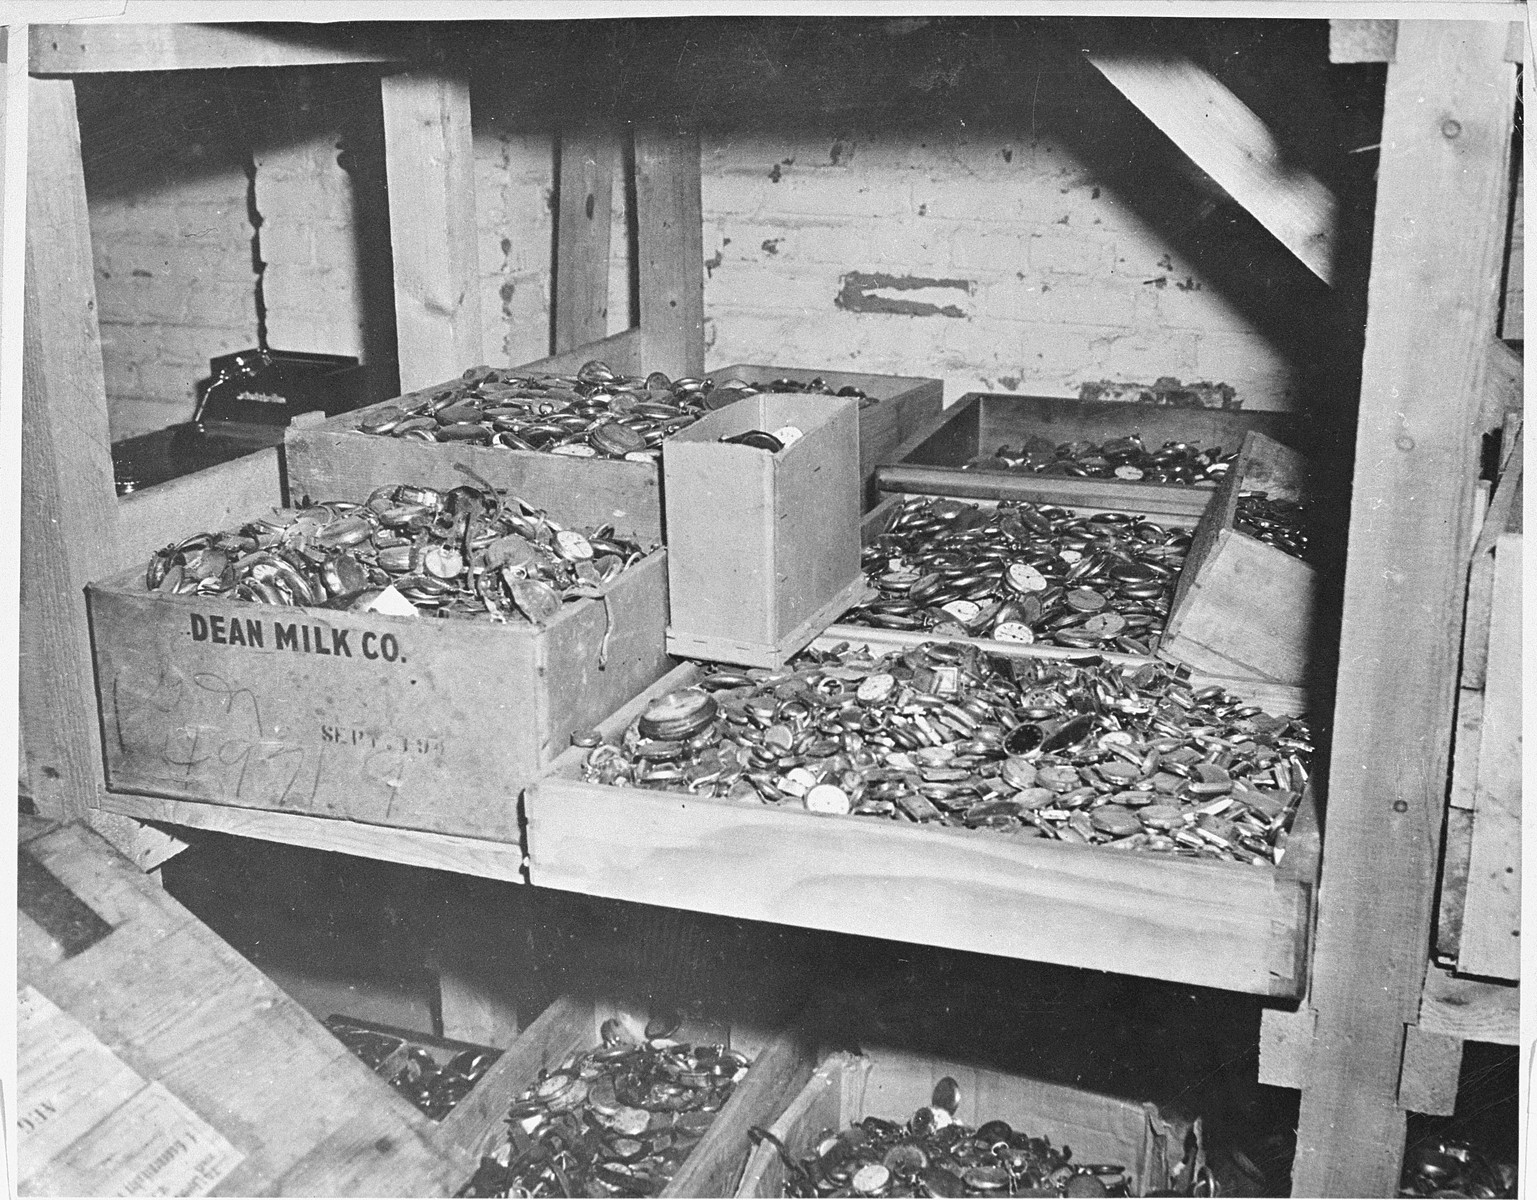 Prisoners' watches confiscated by the SS in Buchenwald and discovered by the First U.S. Army in a cave adjoining the camp.